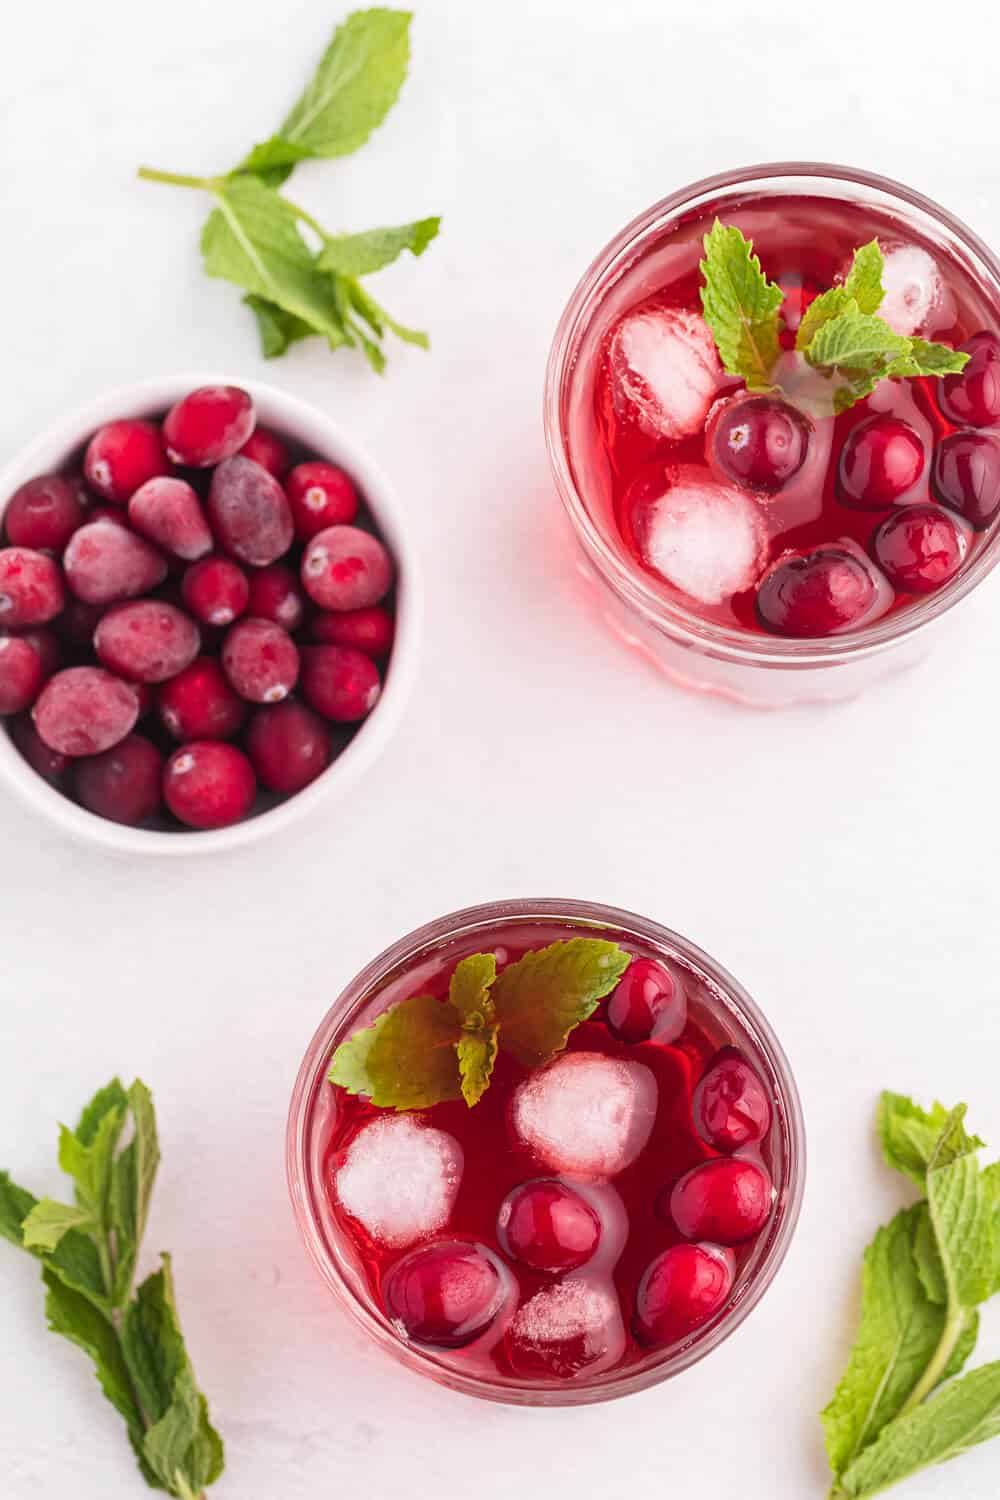 Cranberry Mint Mocktail - This mocktail is the perfect holiday party beverage. The red cranberries and green mint echo the colours of the season, with a sweet, refreshing and bubbly tang!